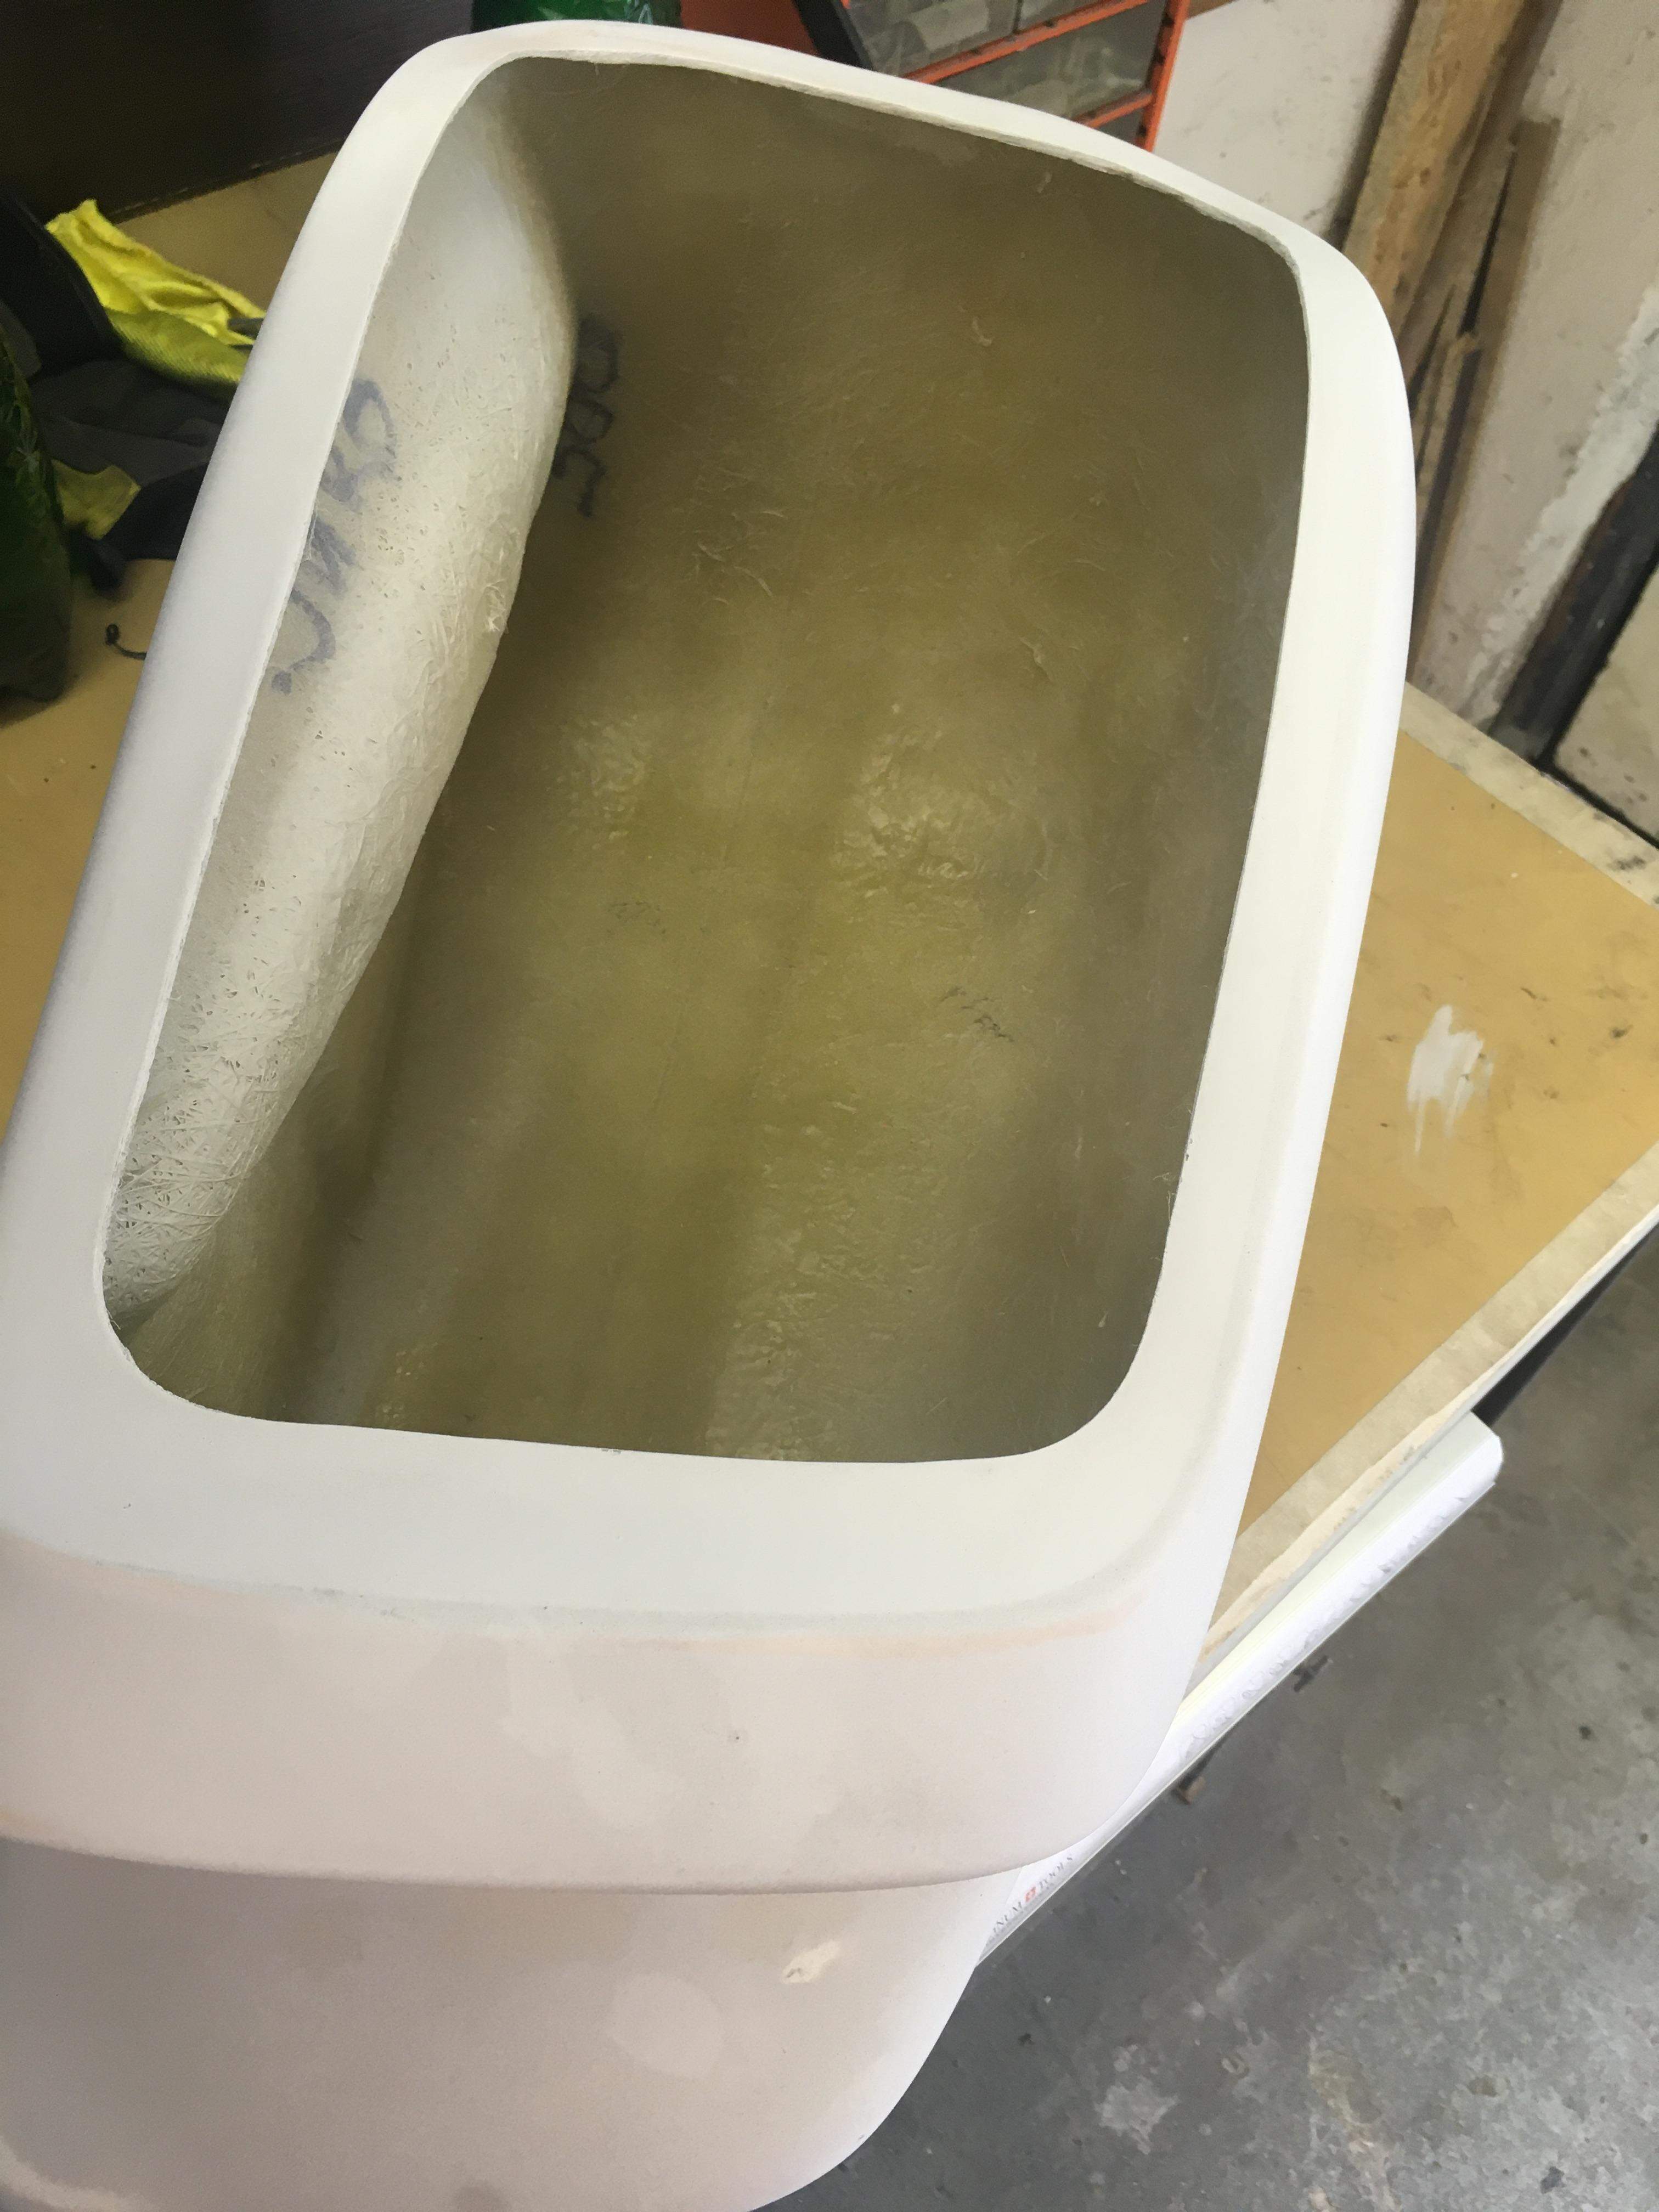 Saddlebags Bulldog M109R Primer color ready for painting without inner upholstery